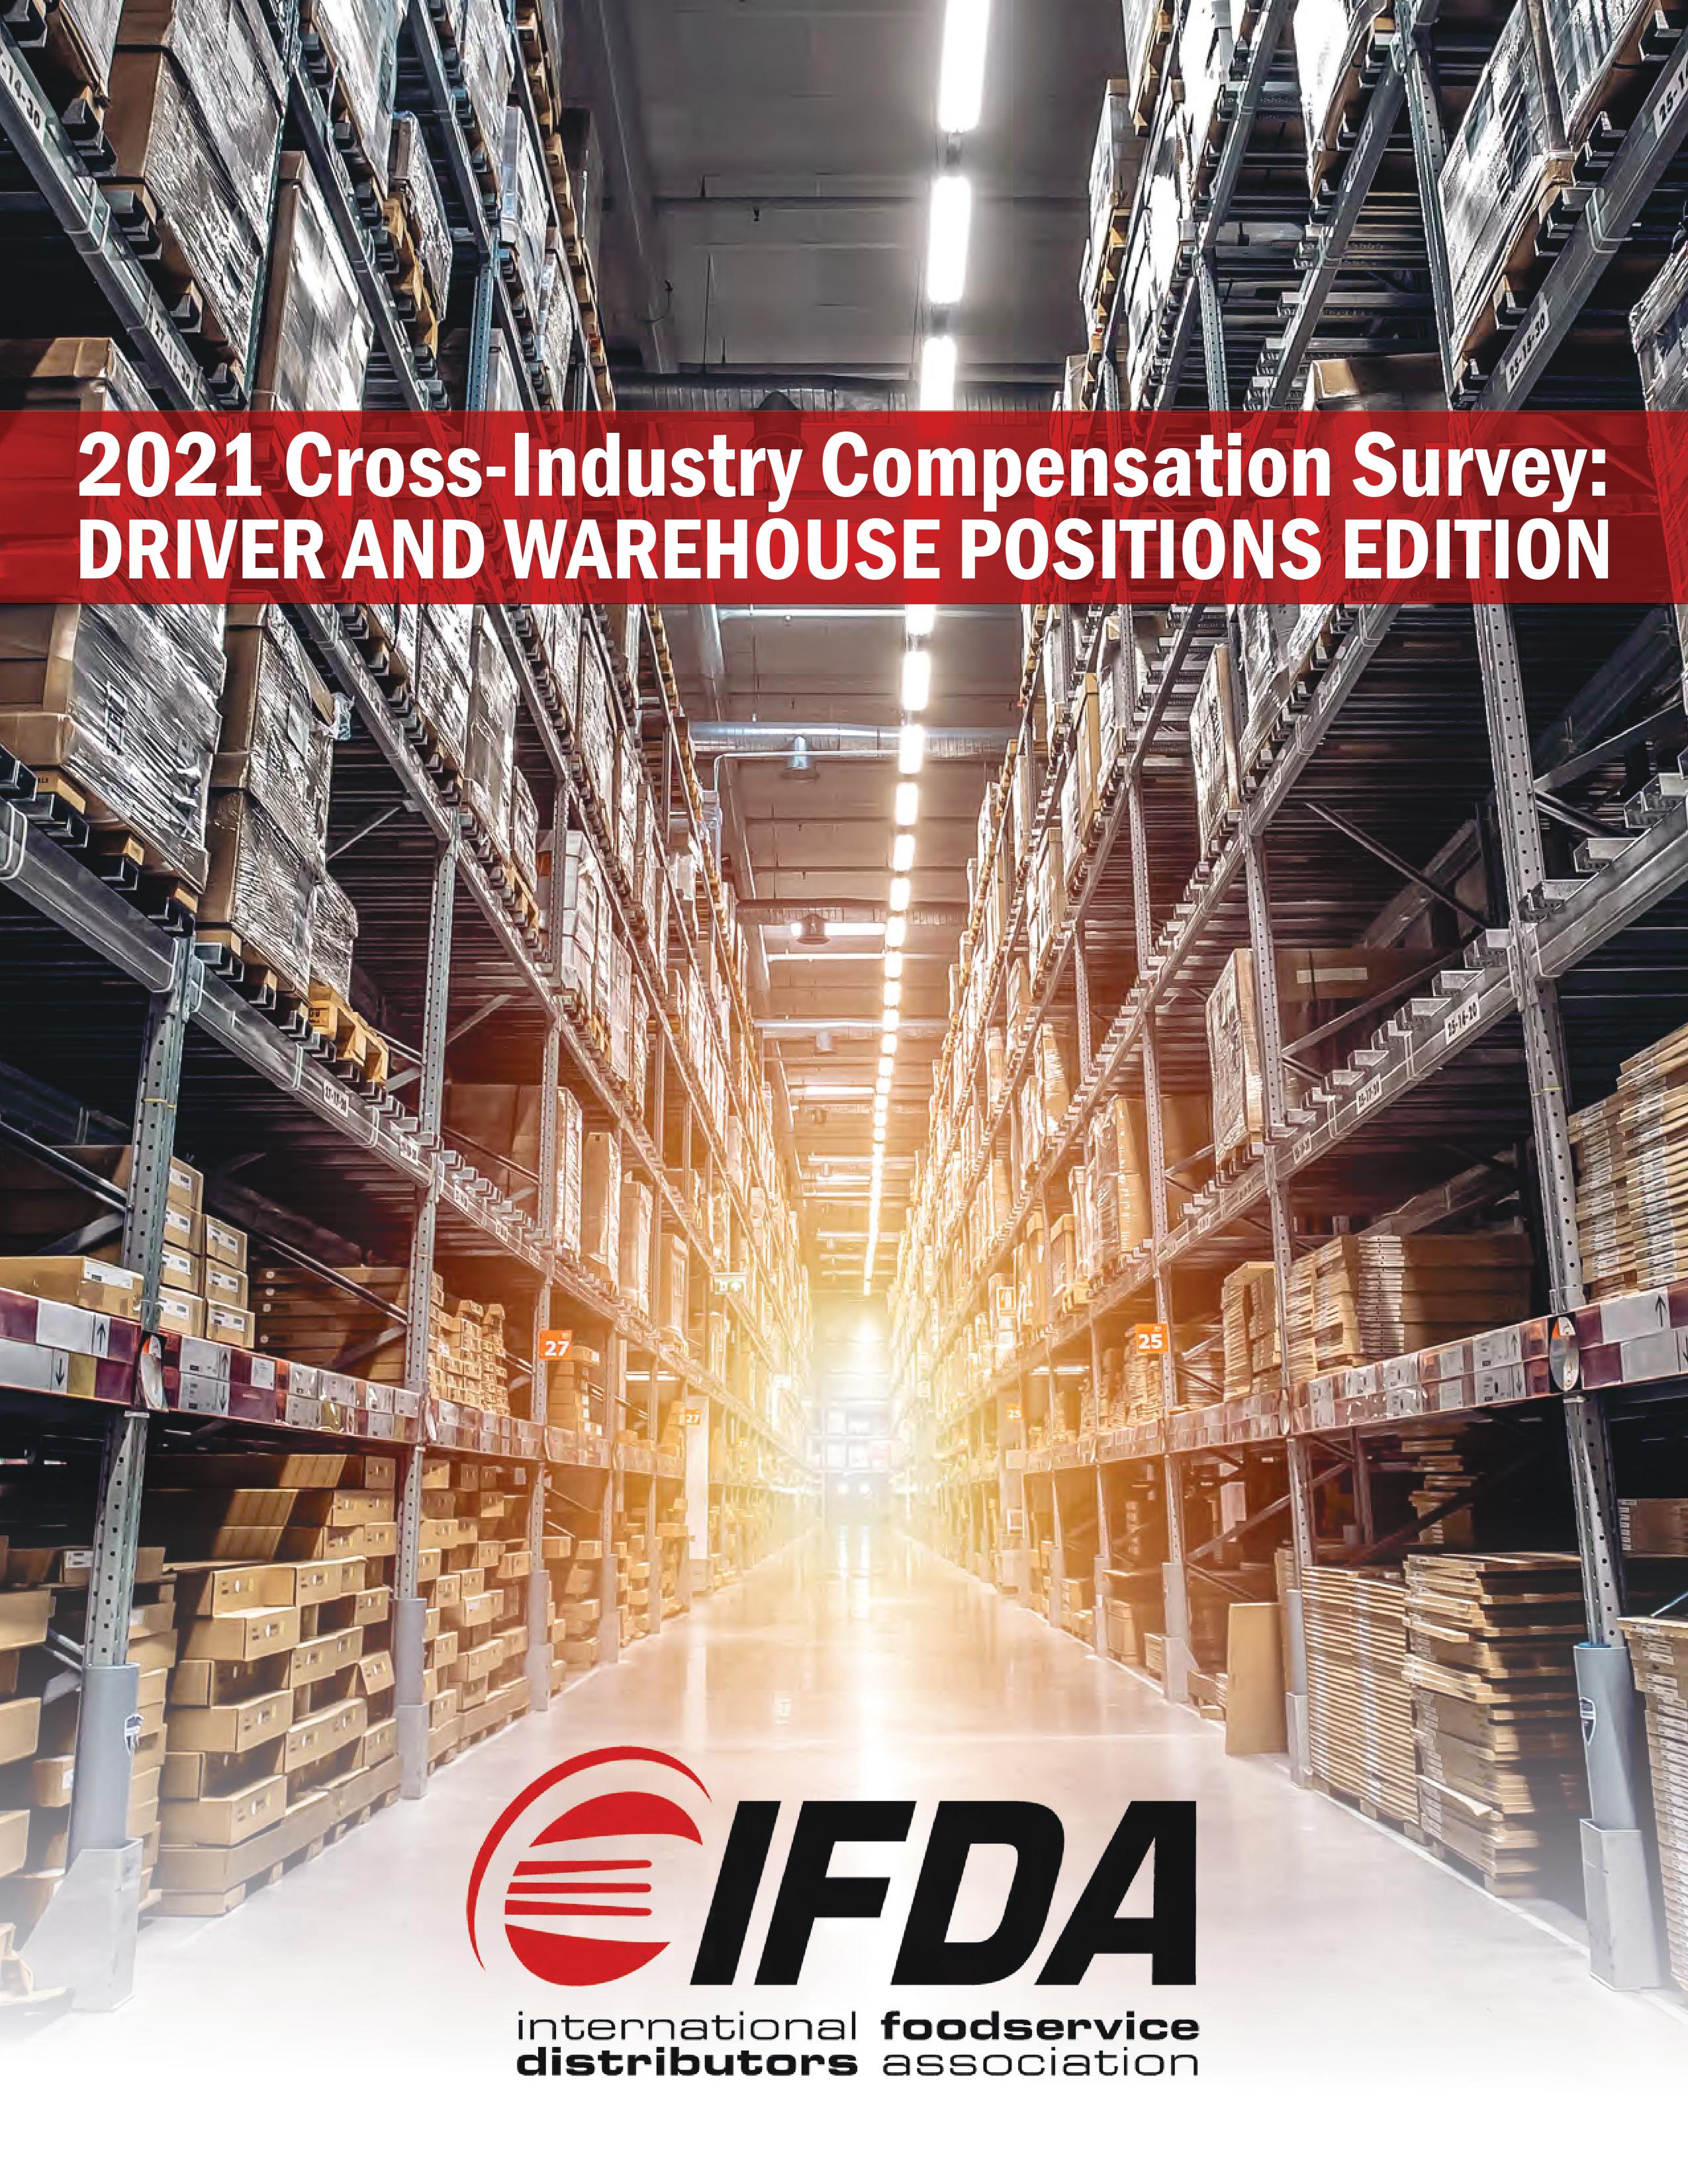 2021 Compensation Survey: Driver and Warehouse Positions